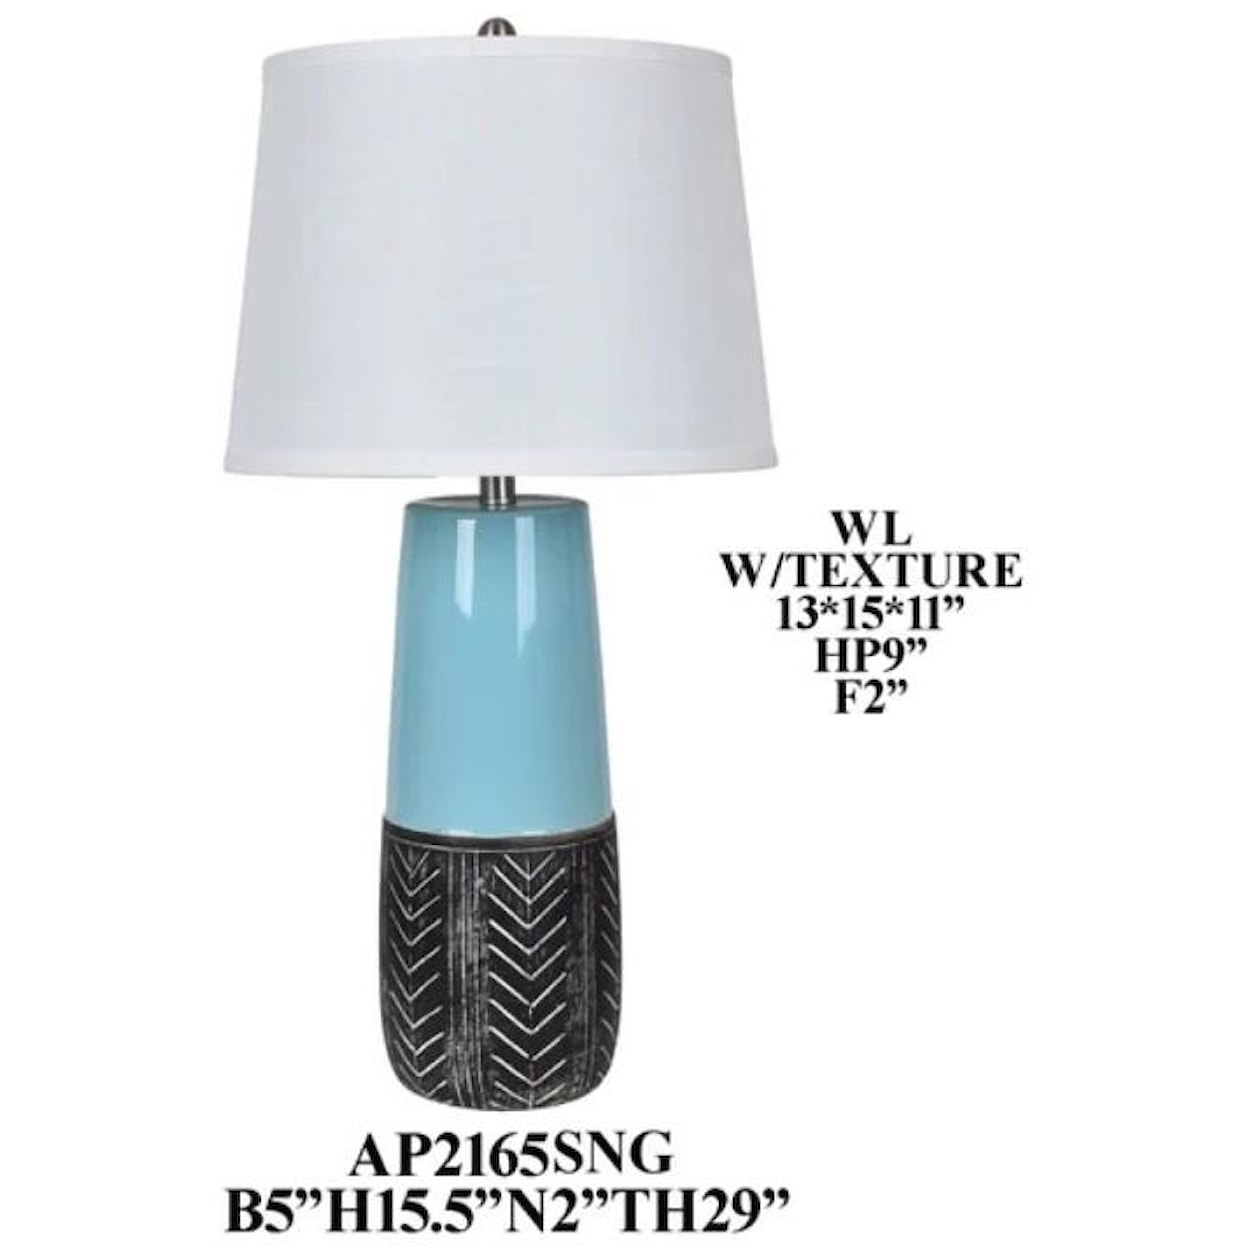 Crestview Collection Lighting Ceramic Table Lamp